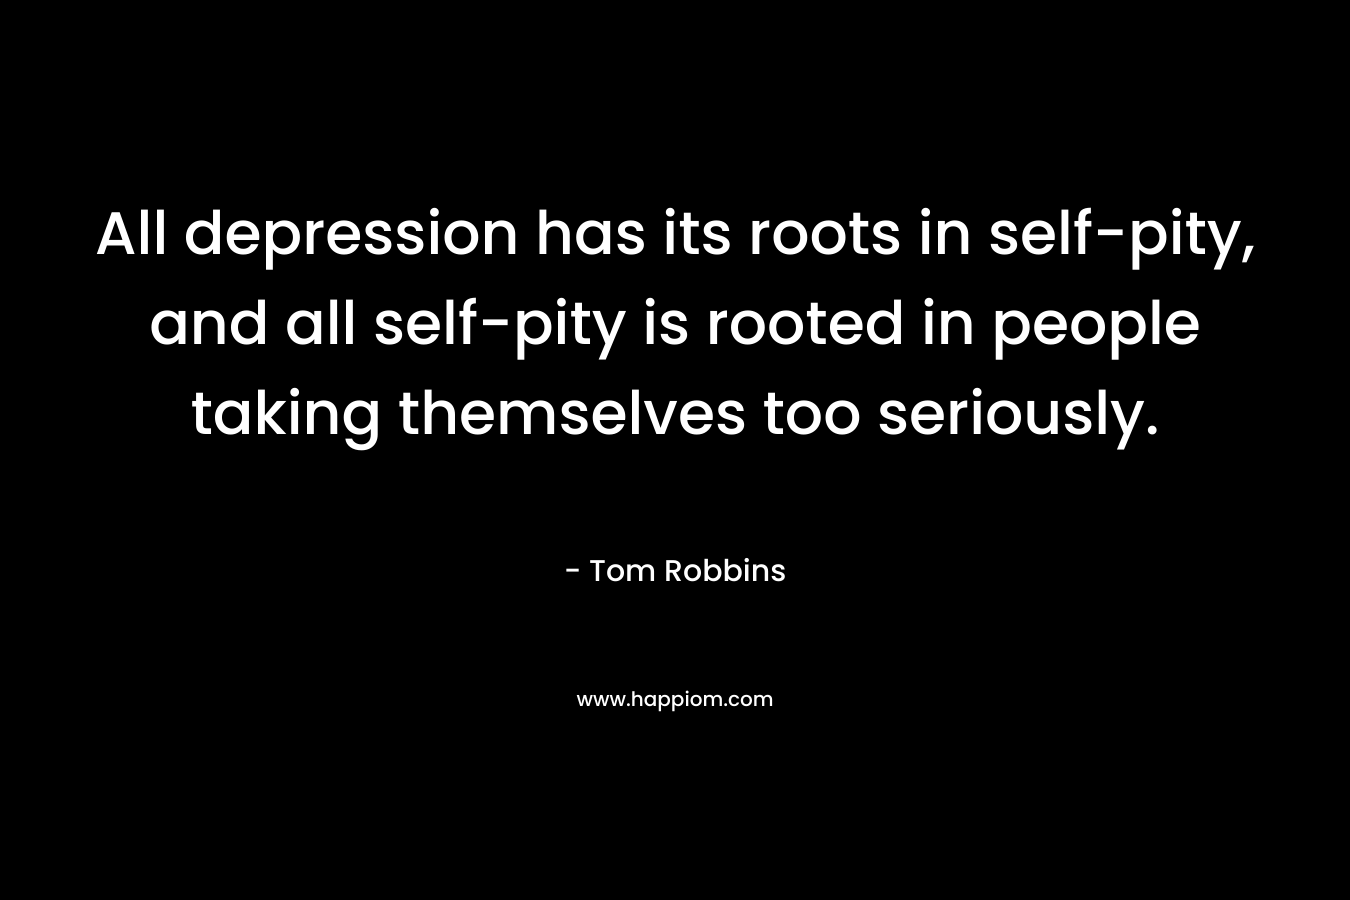 All depression has its roots in self-pity, and all self-pity is rooted in people taking themselves too seriously. – Tom Robbins